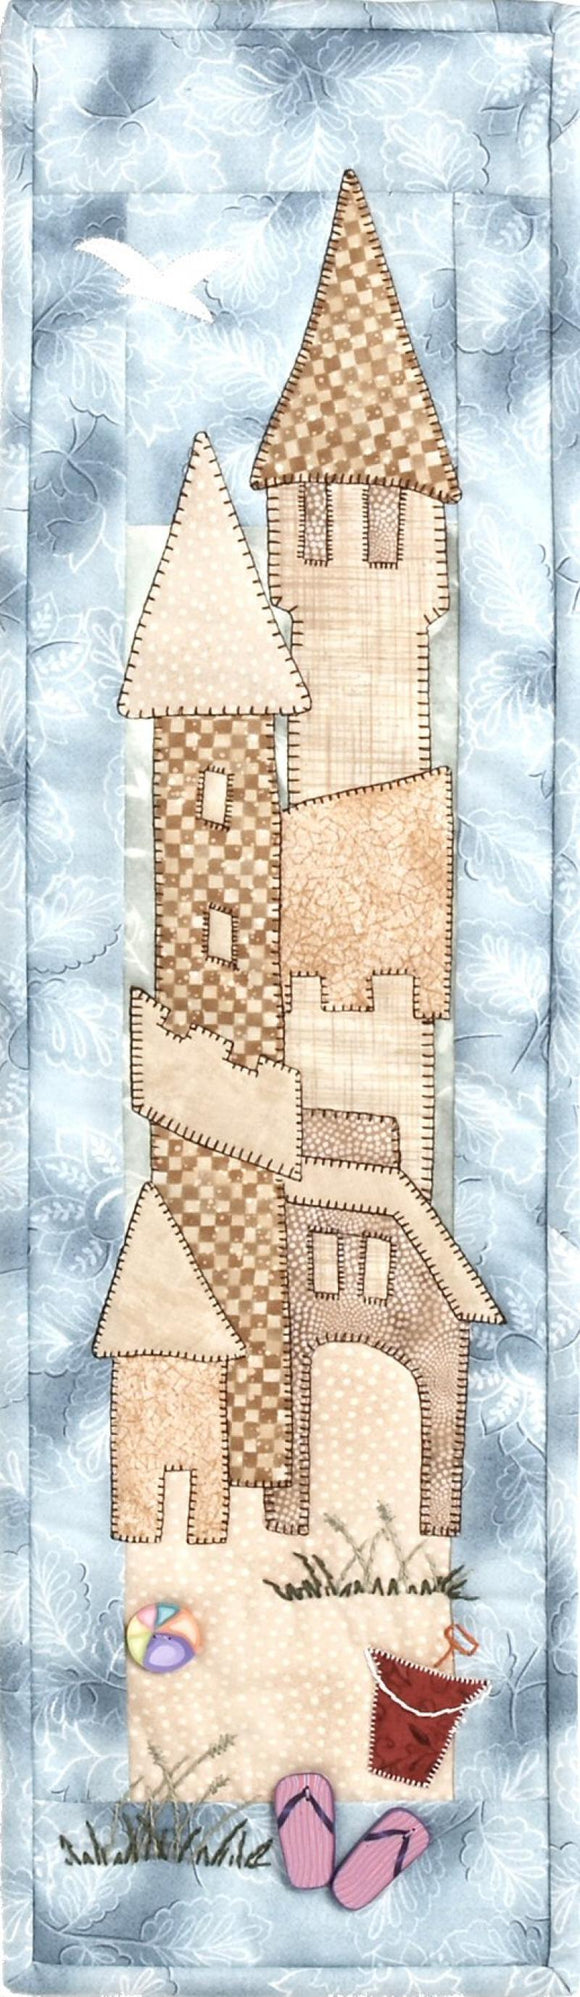 Sandcastle Downloadable Pattern by Patch Abilities